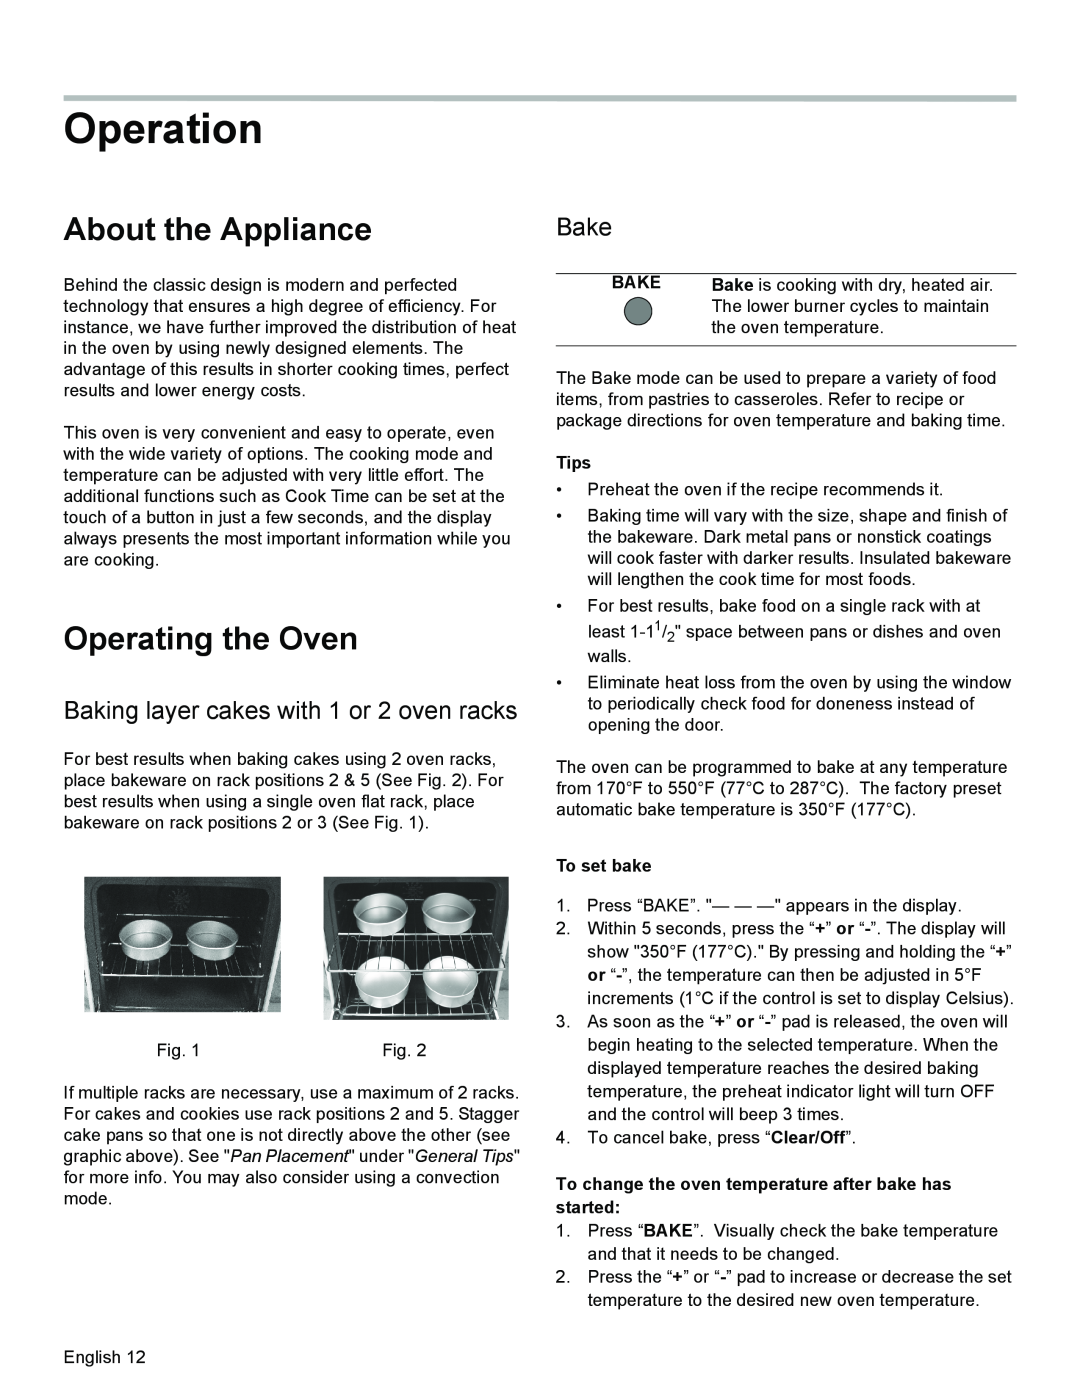 Bosch Appliances HGS3053UC Operation, About the Appliance, Operating the Oven, Baking layer cakes with 1 or 2 oven racks 